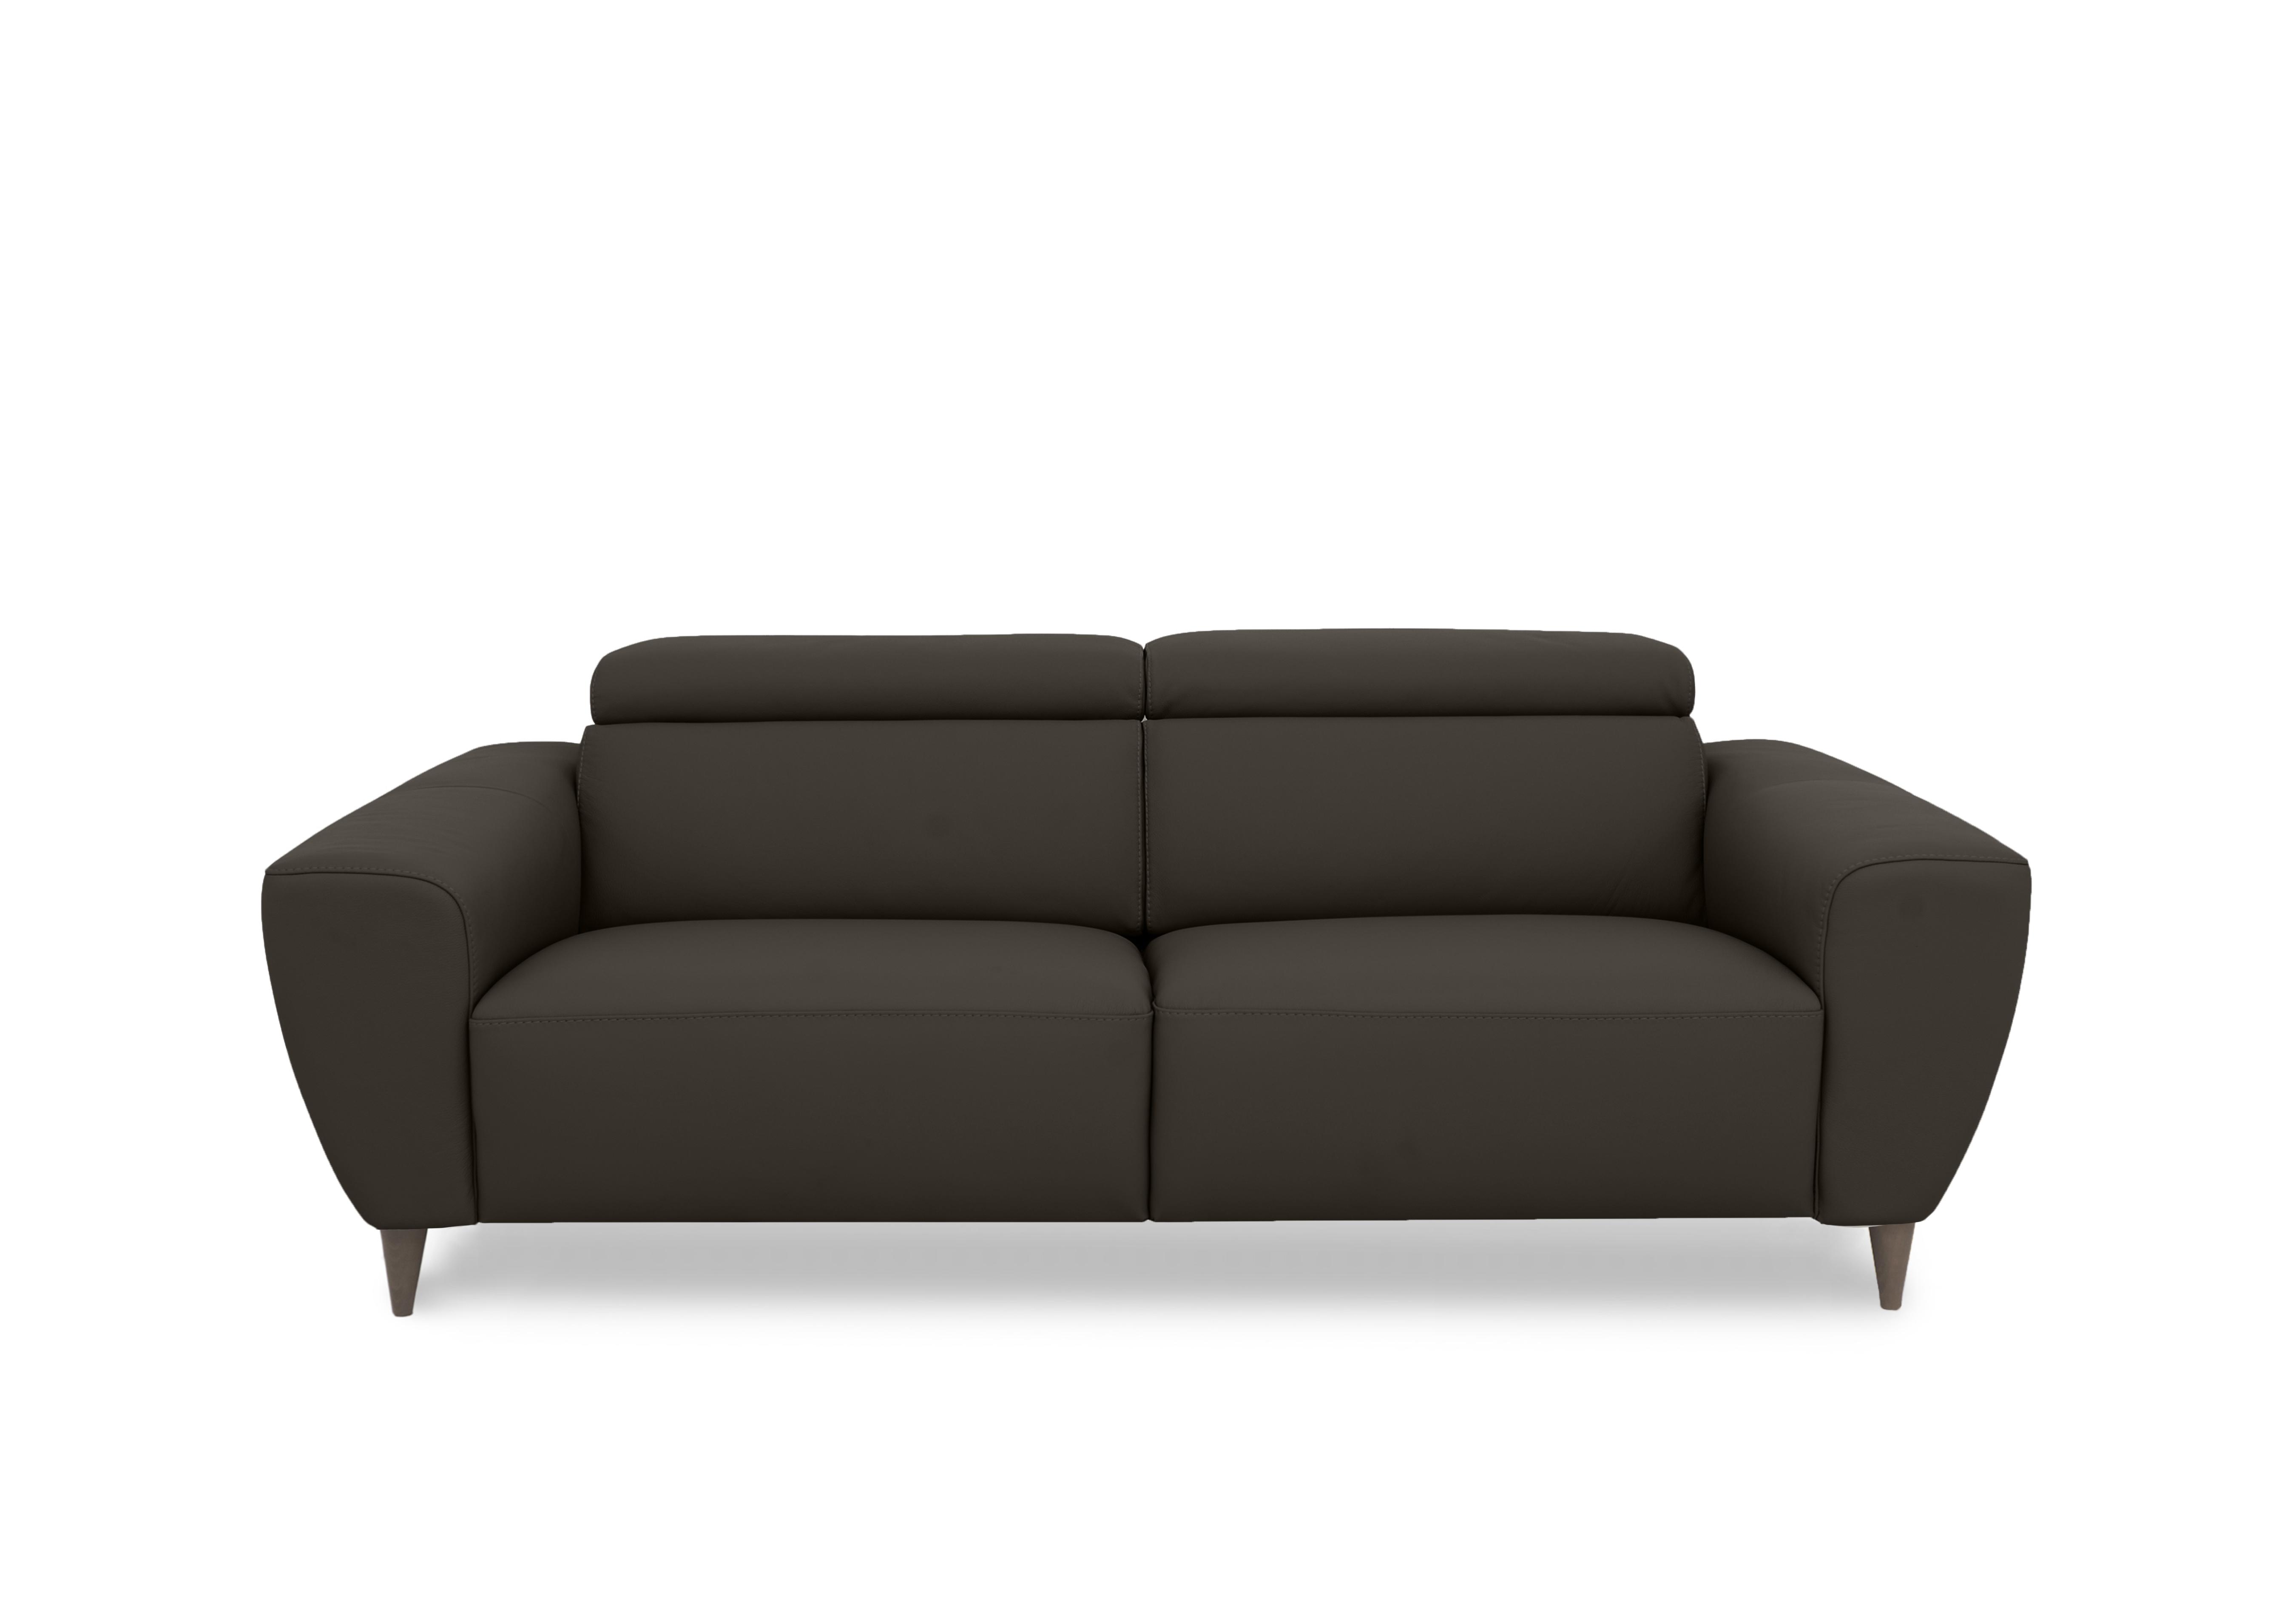 Milano 3 Seater Leather Sofa in 91 Torello Chocol-S To Ft on Furniture Village